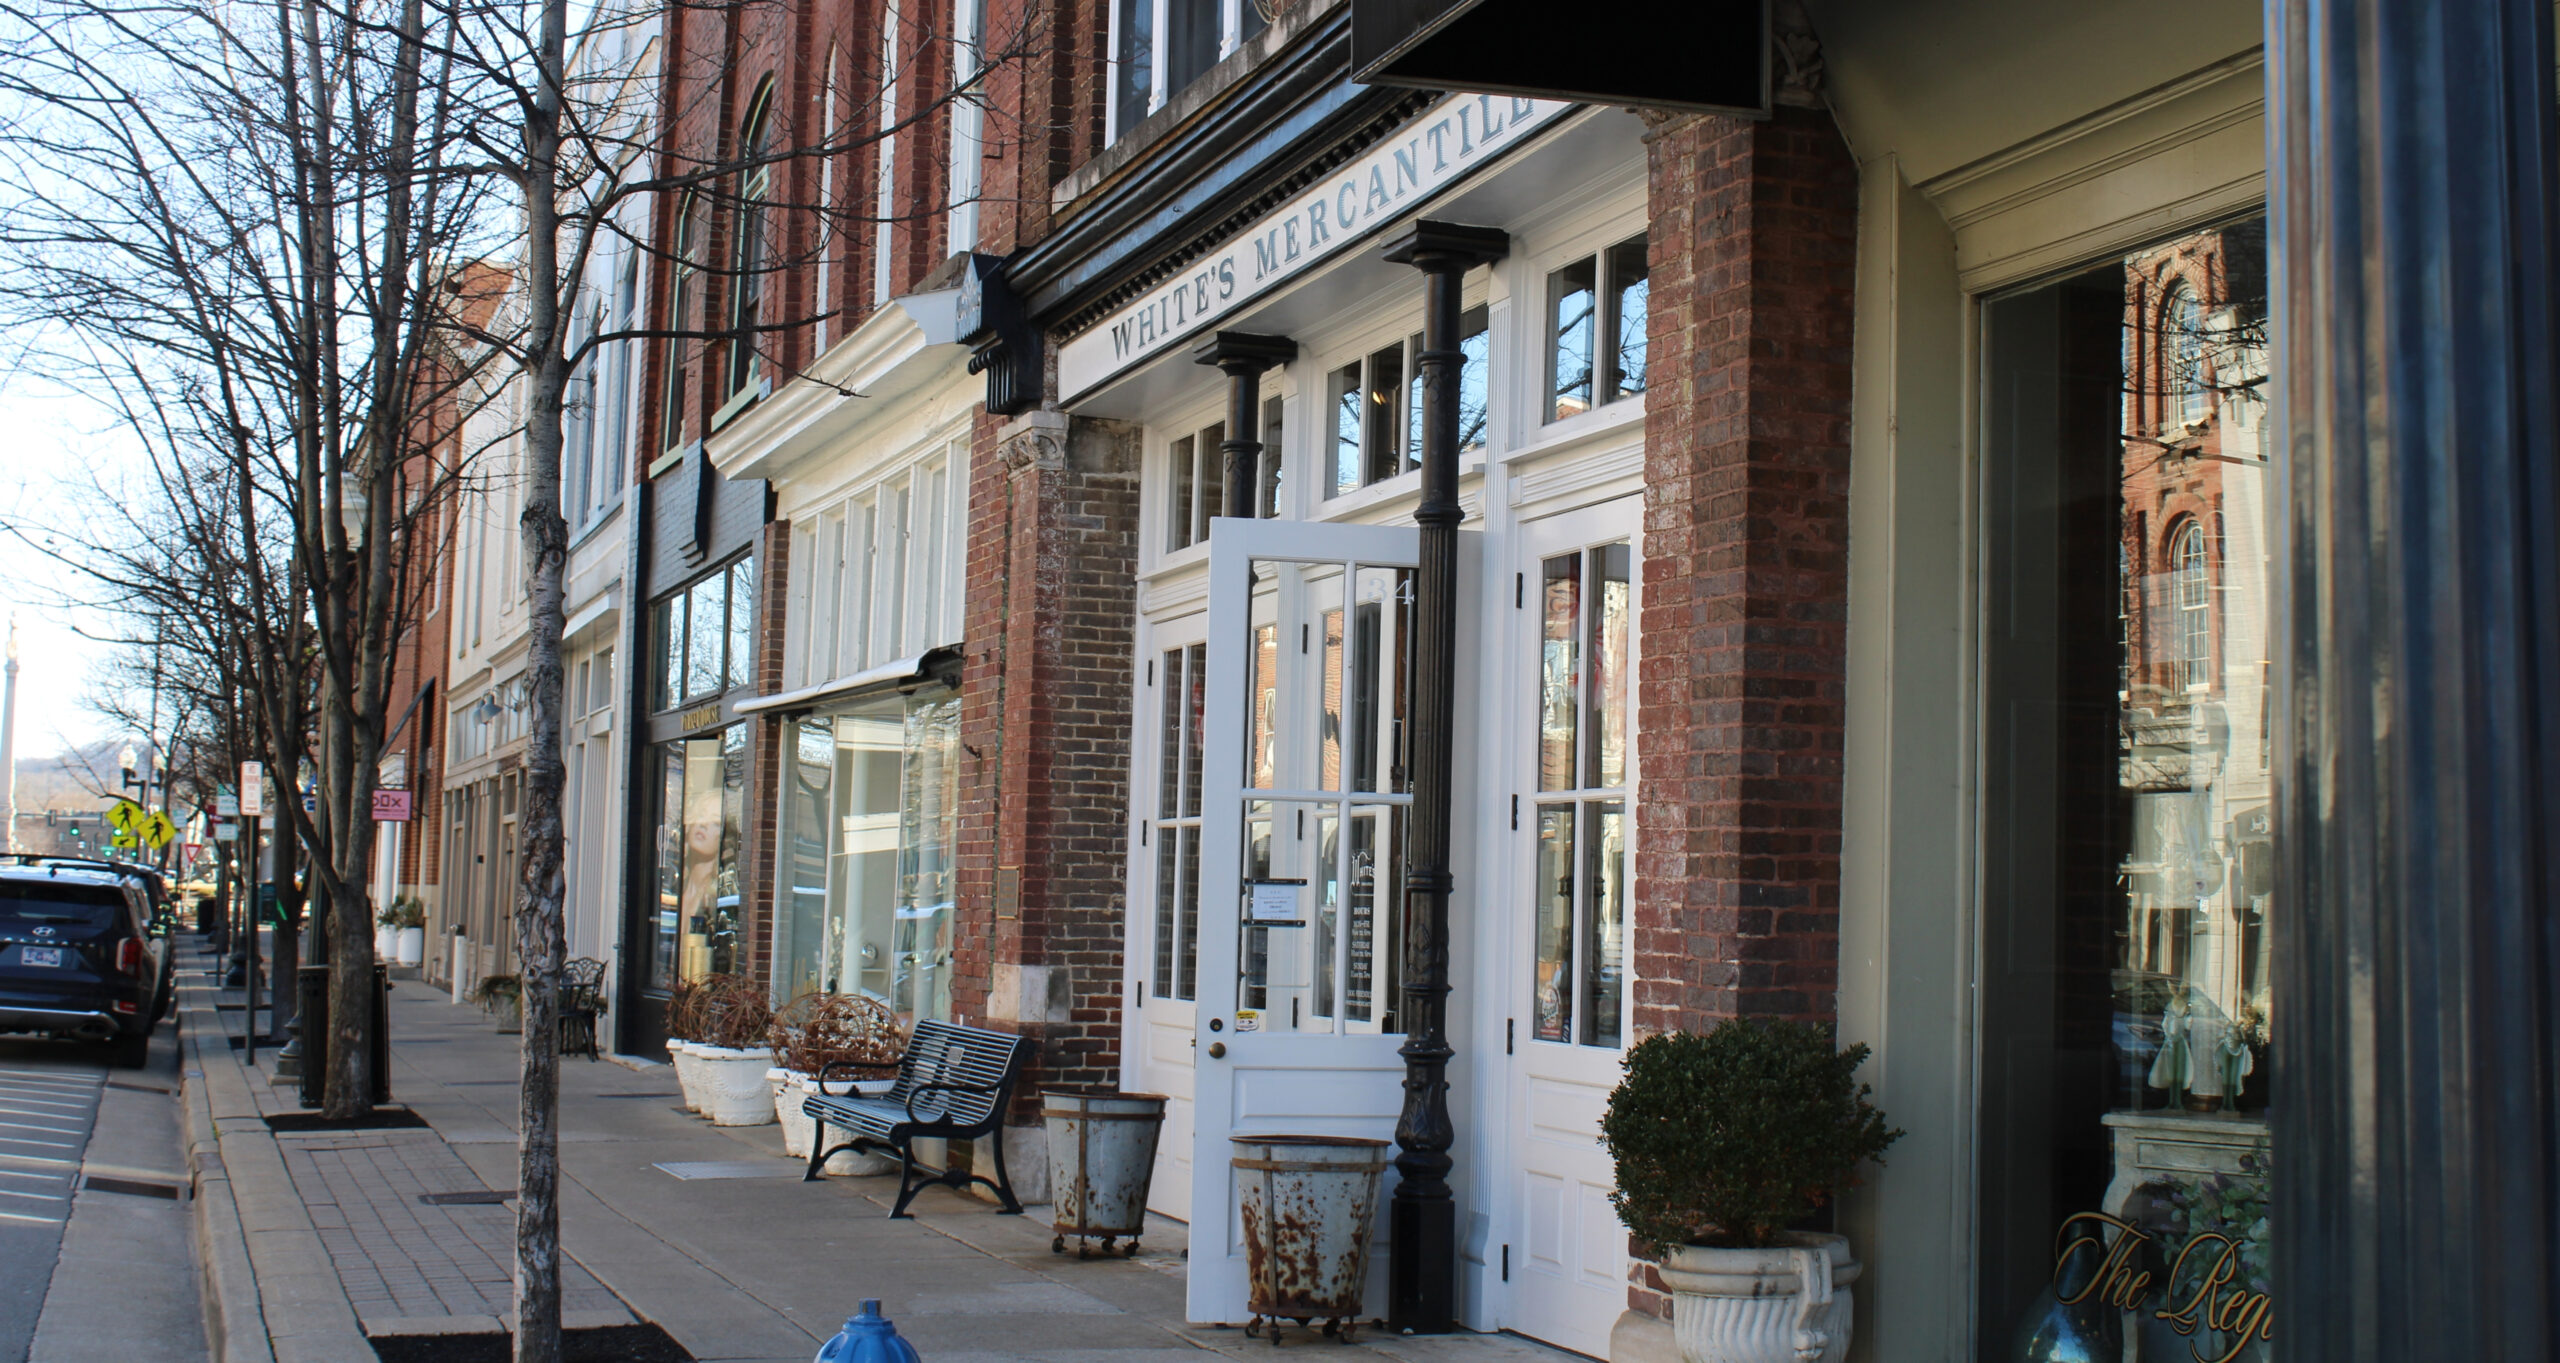 Whites Mercantile and Main Street shops and boutiques in historic downtown Franklin, Tennessee.